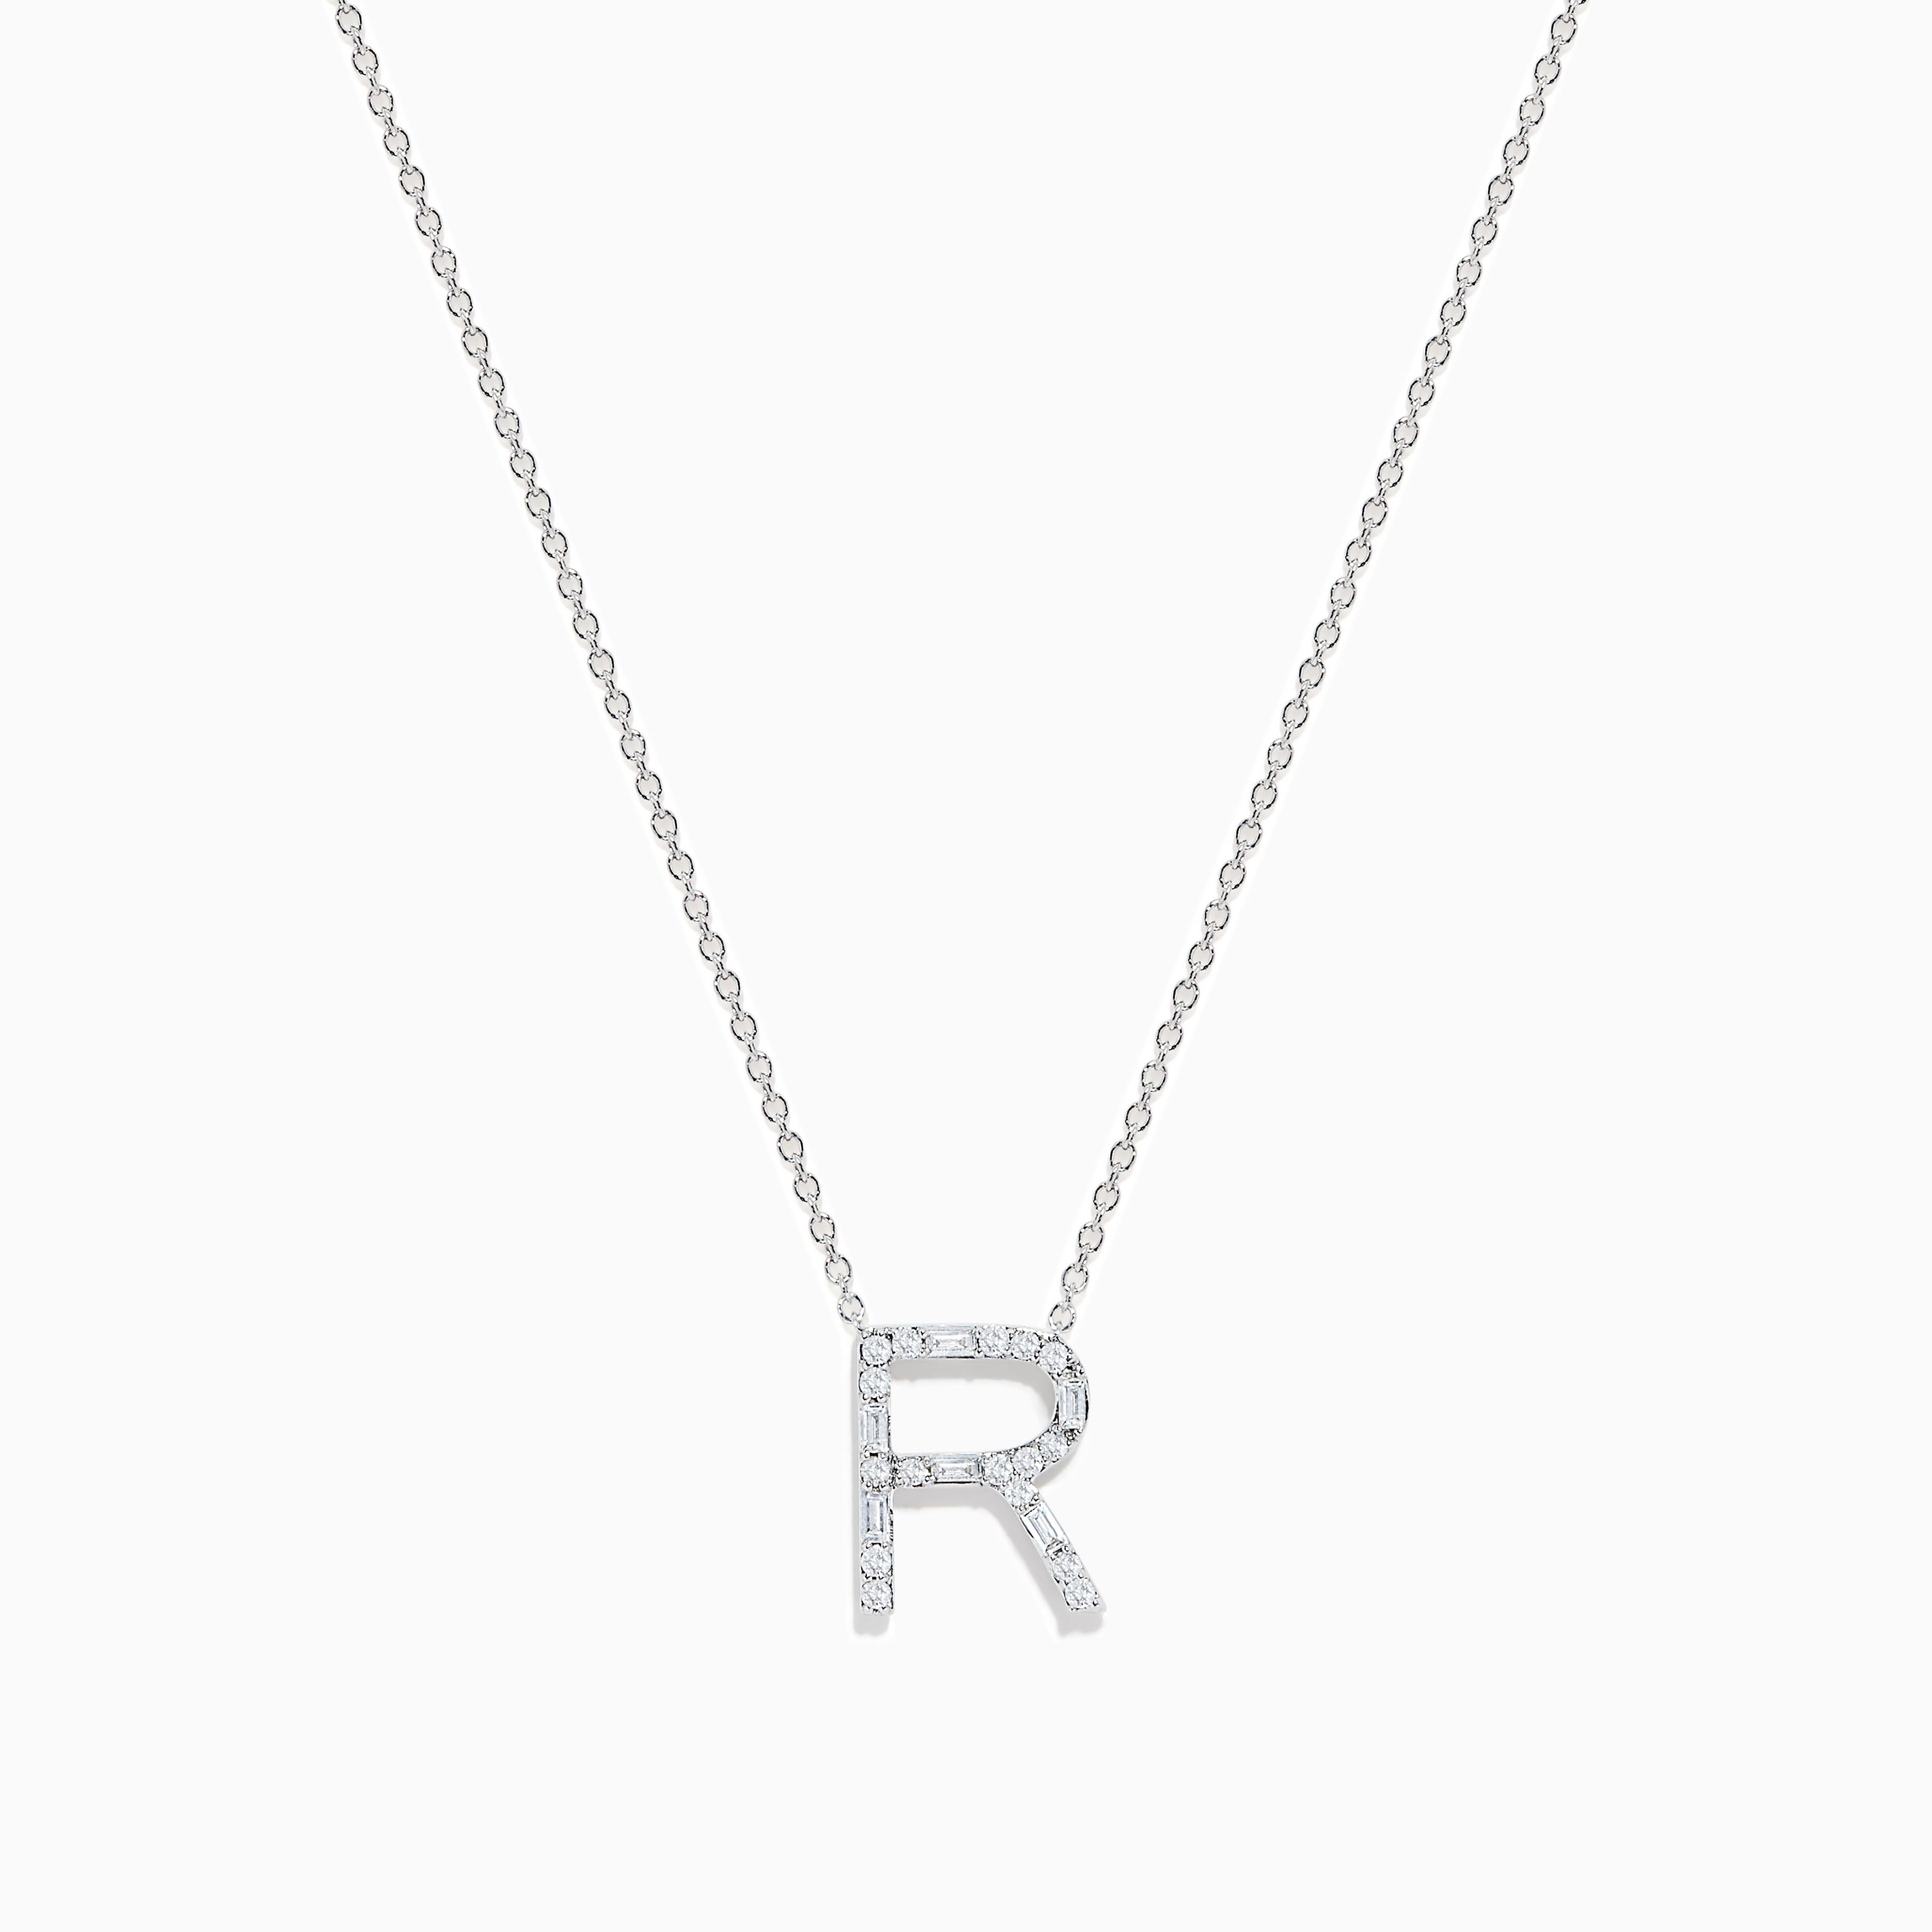 13678 - Silver (925) gold-plated necklace - letter R - Letters - Silver  Jewelry - Necklaces without stones - Jewelry Wholesale On-line Sentiell